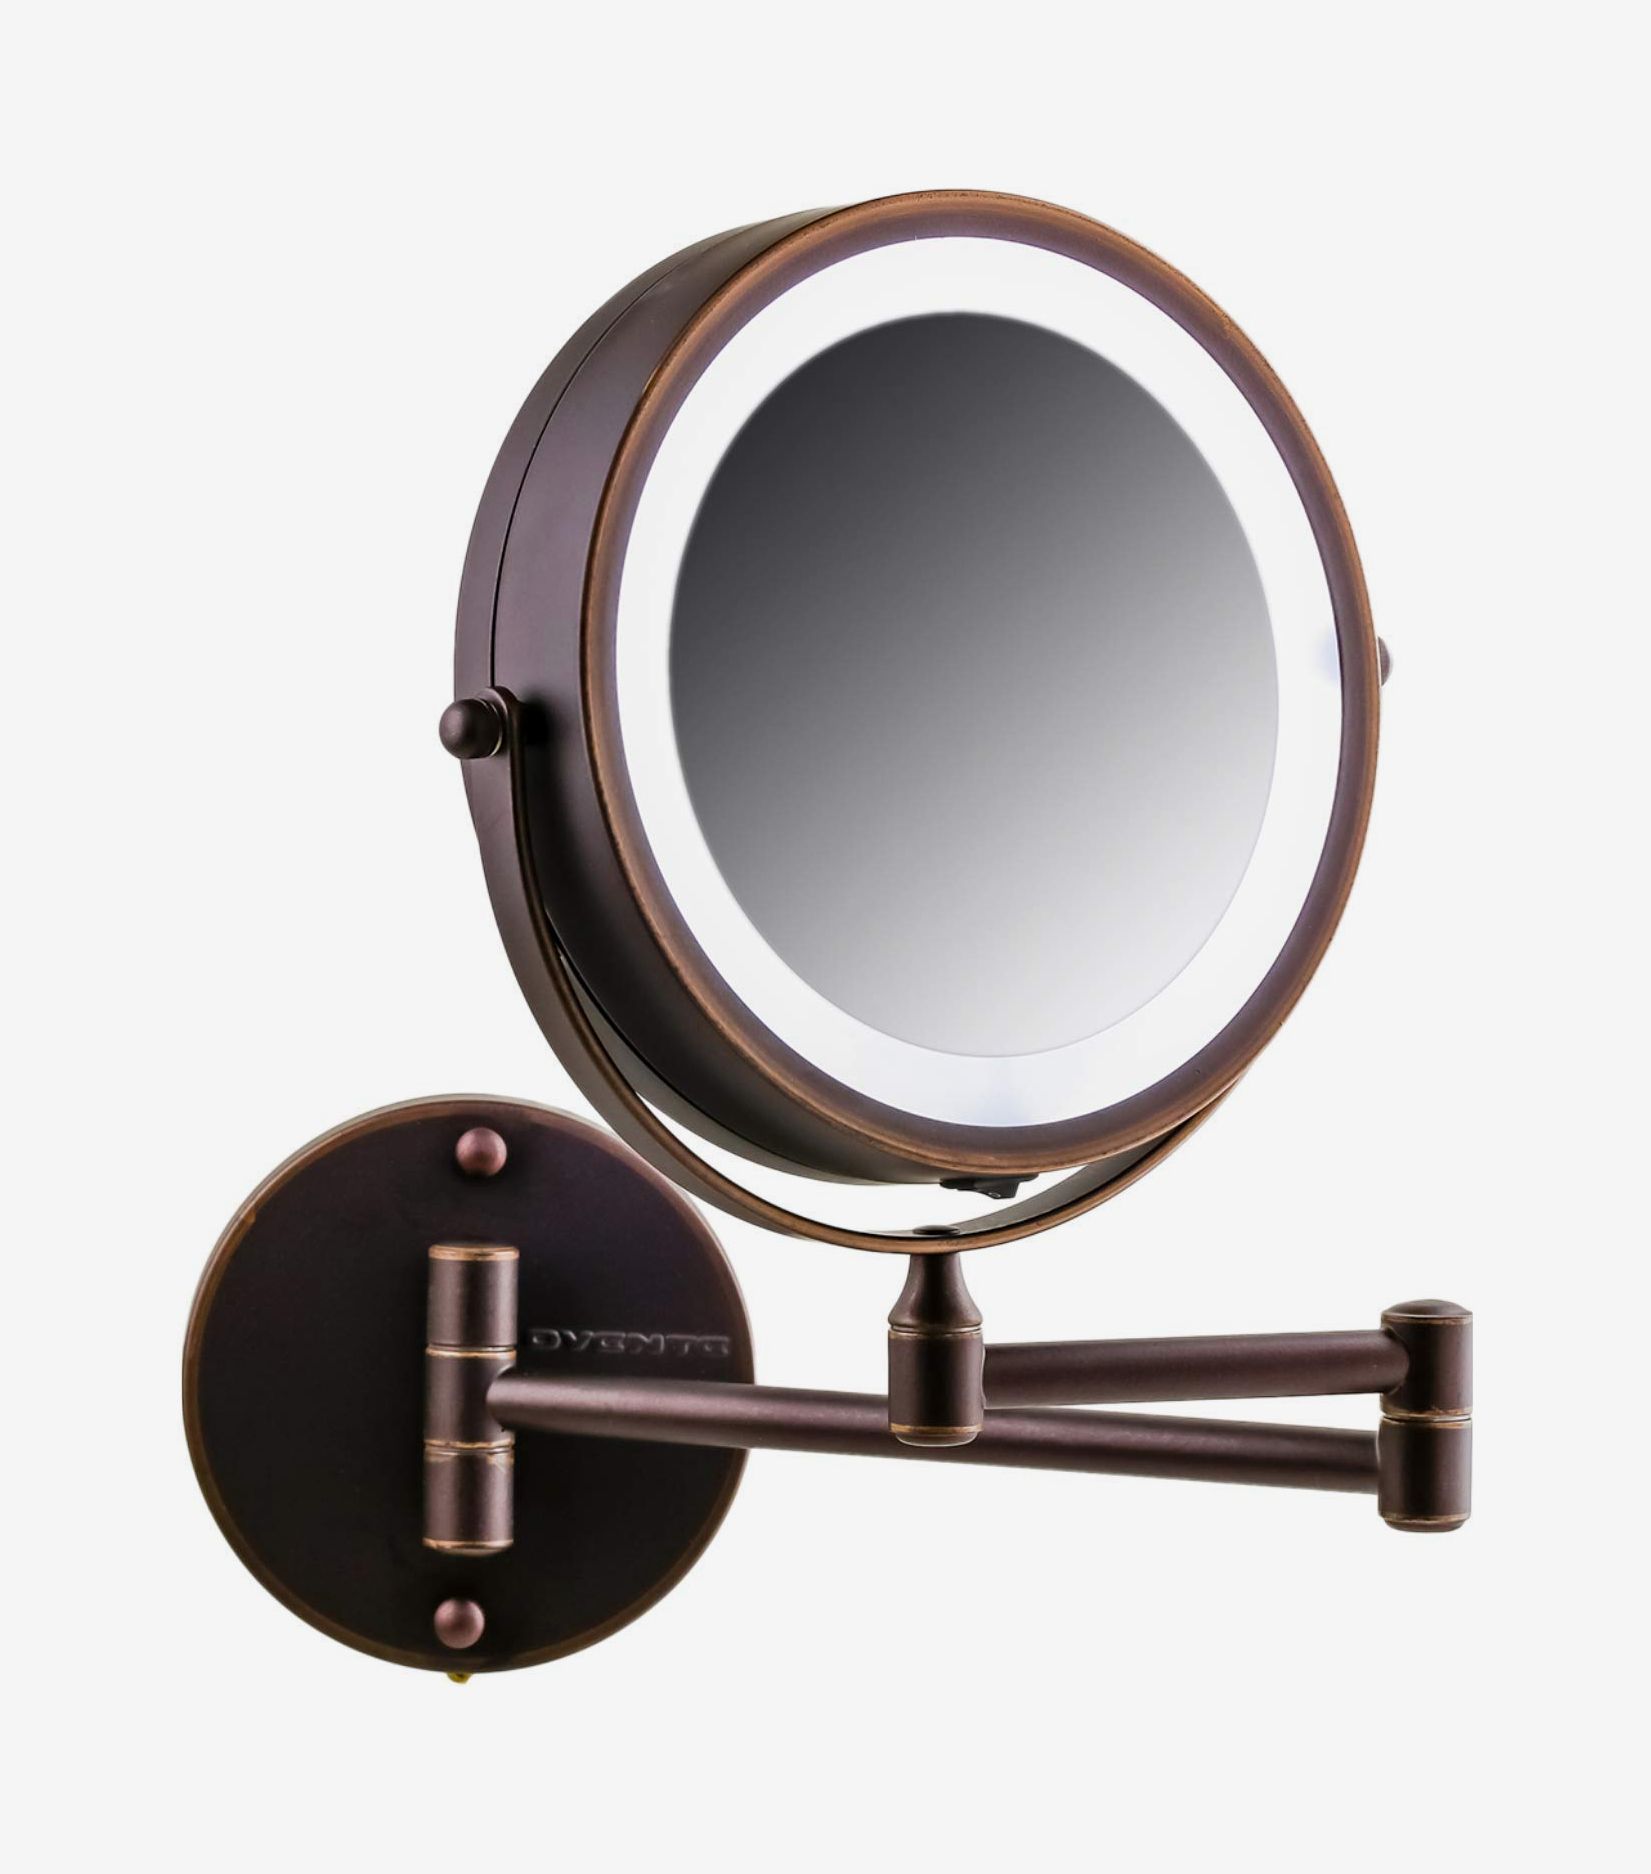 14 Best Lighted Makeup Mirrors 2022, Best High Magnification Makeup Mirrors